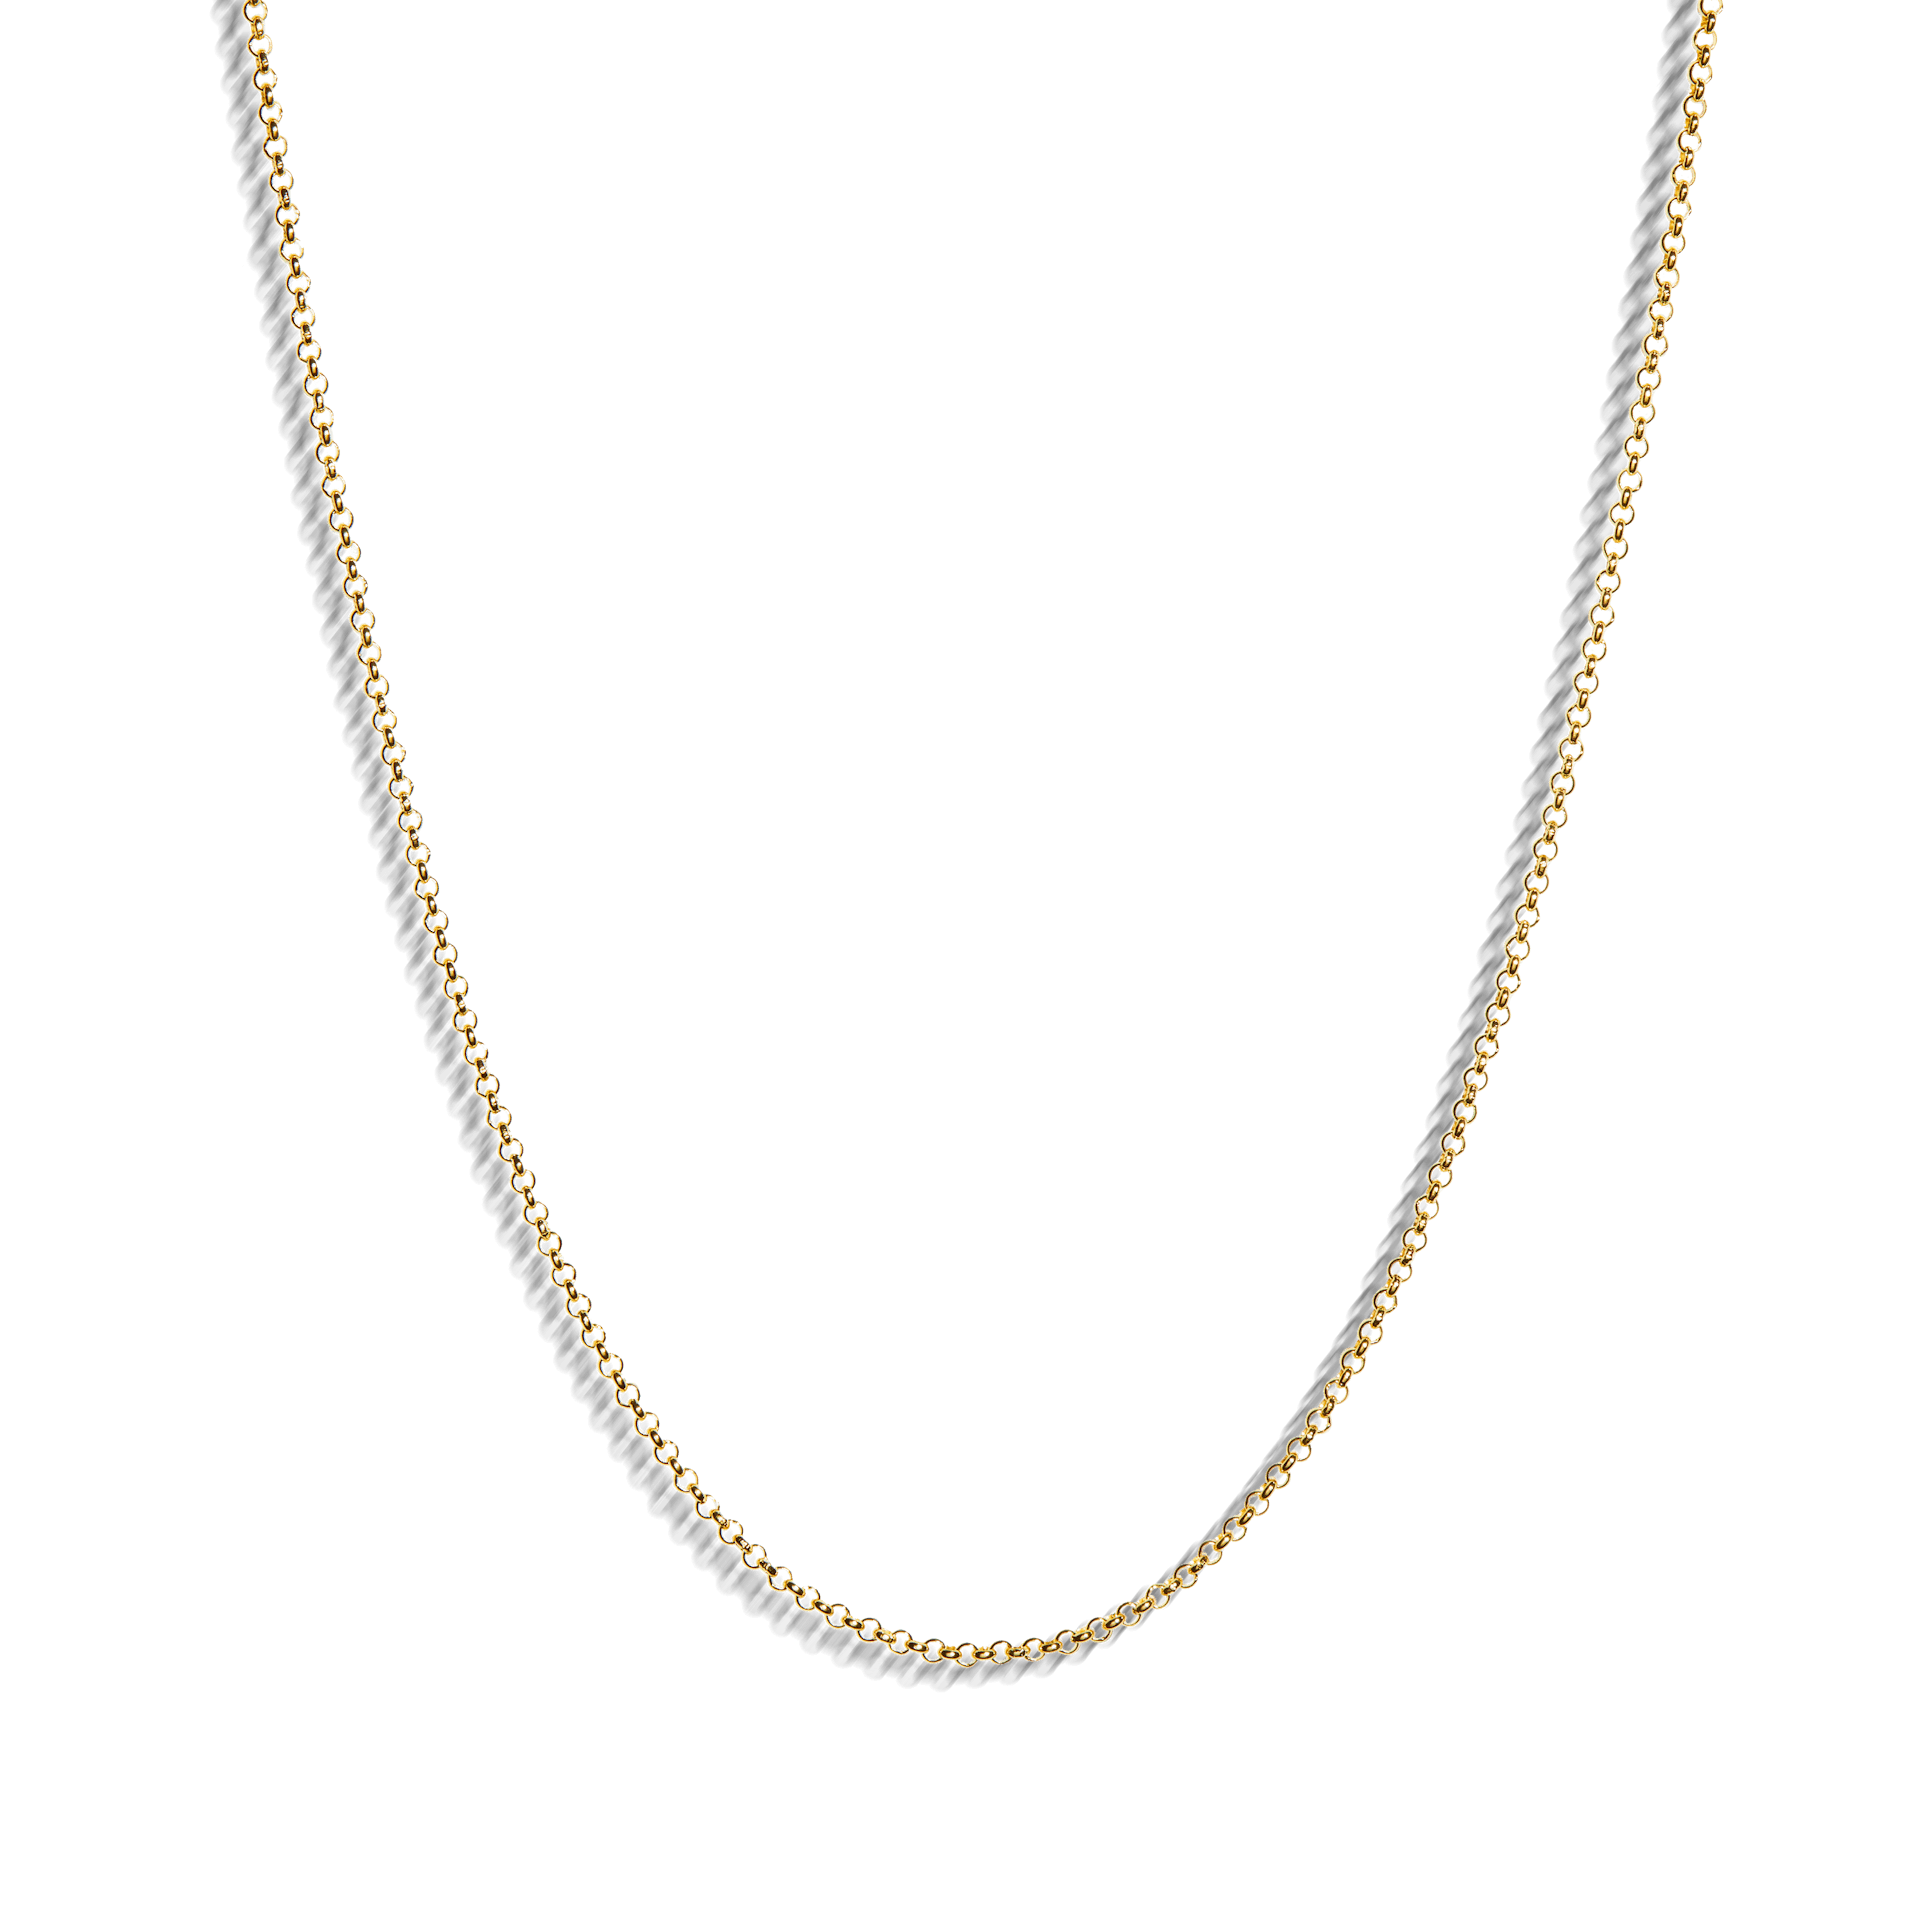 Solid 14K Gold Rolo Cable Chain, Men Gold Chain, Real 14k Gold Cable Chain  Necklace, Thickness:2mm 2.50mm 3mm, 50cm20 Inc 60cm24 Inc - Etsy